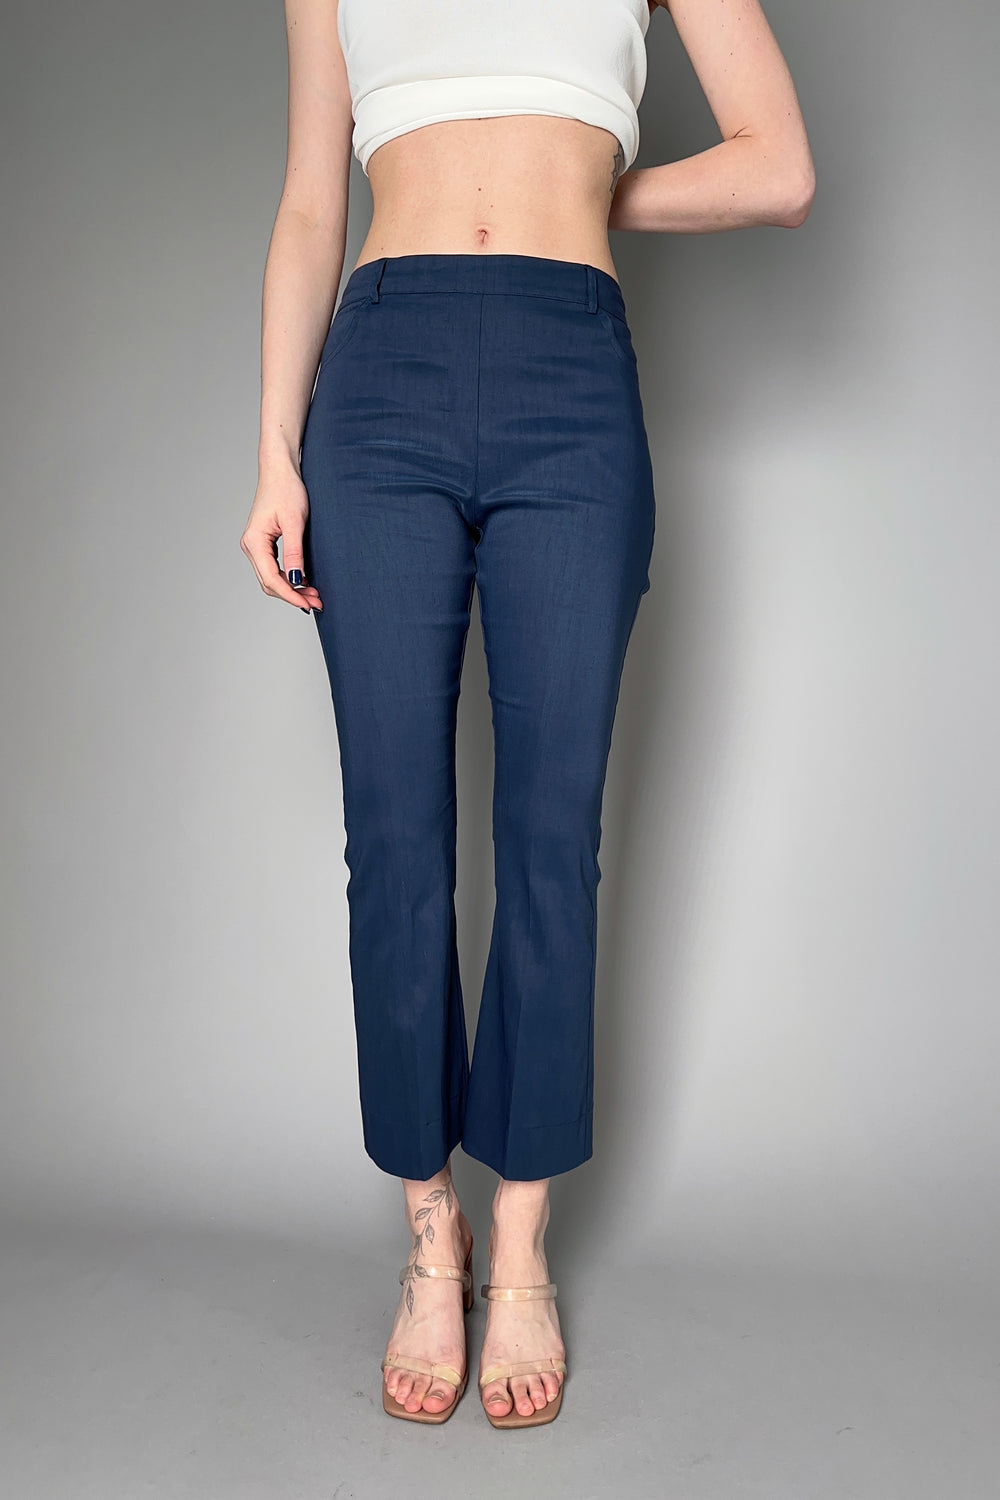 SATIN FINISH LINEN TROUSERS IN NAVY